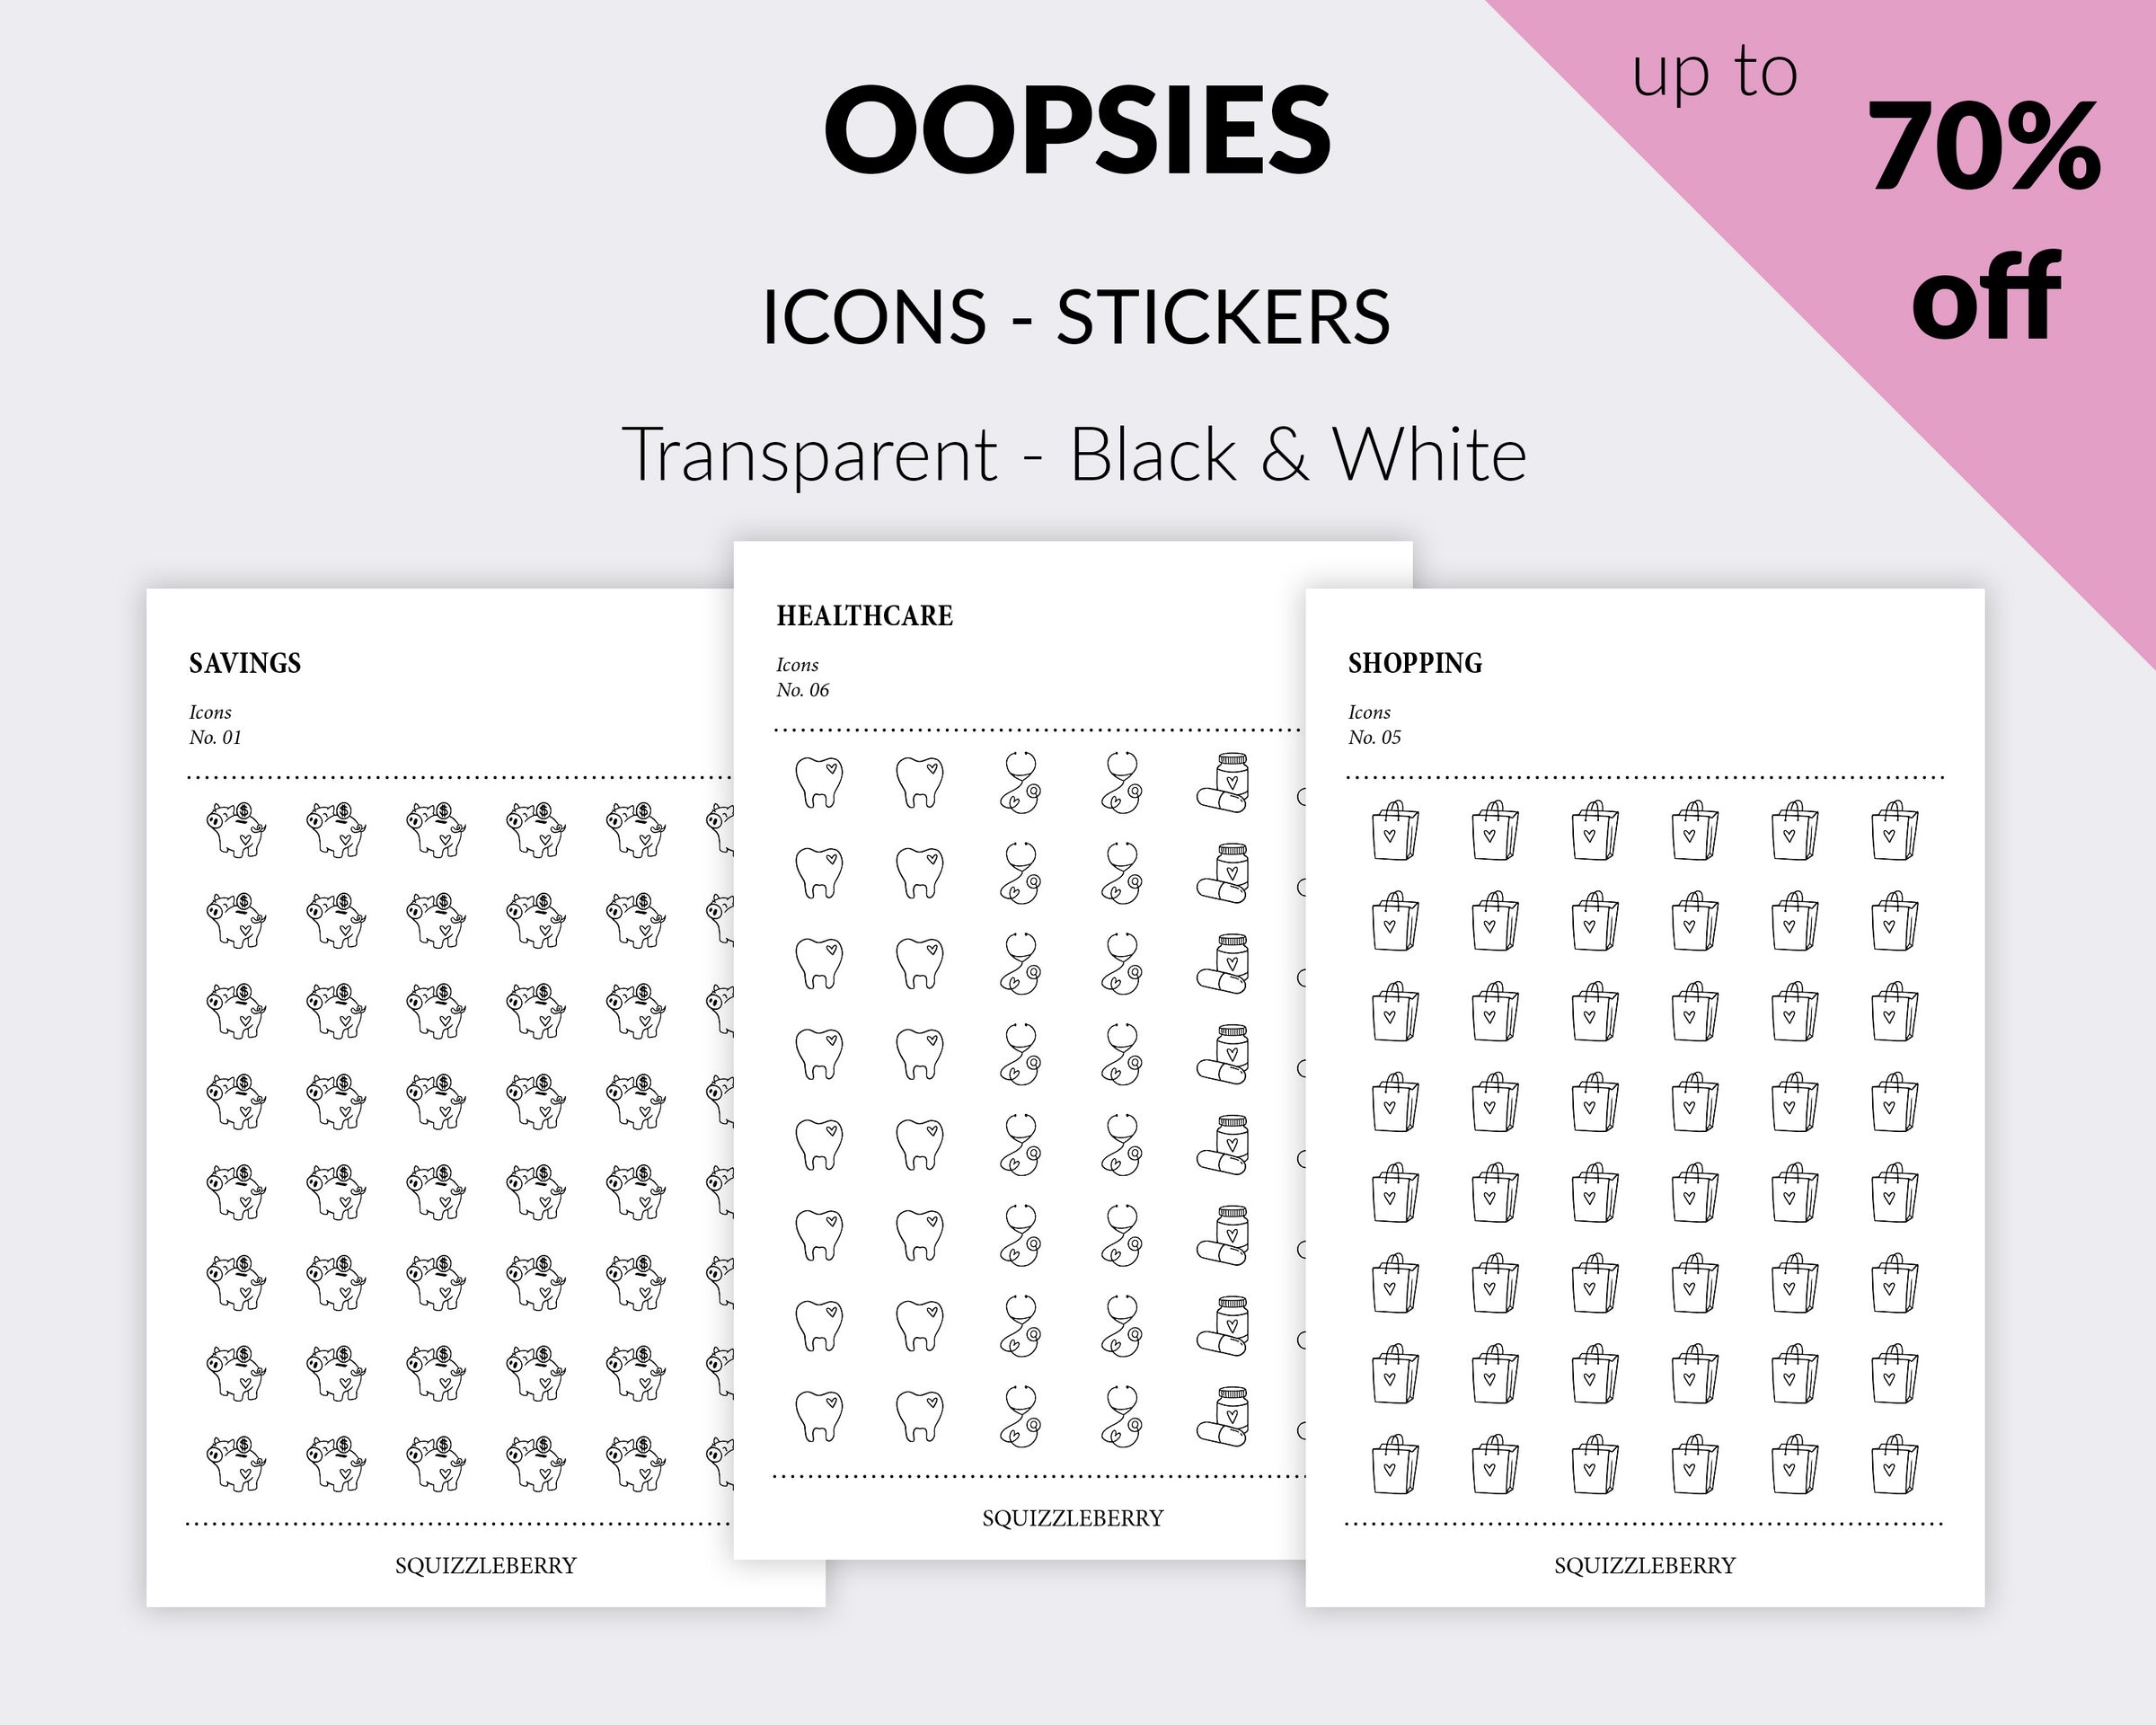 OOPSIE - ICONS - Stickers